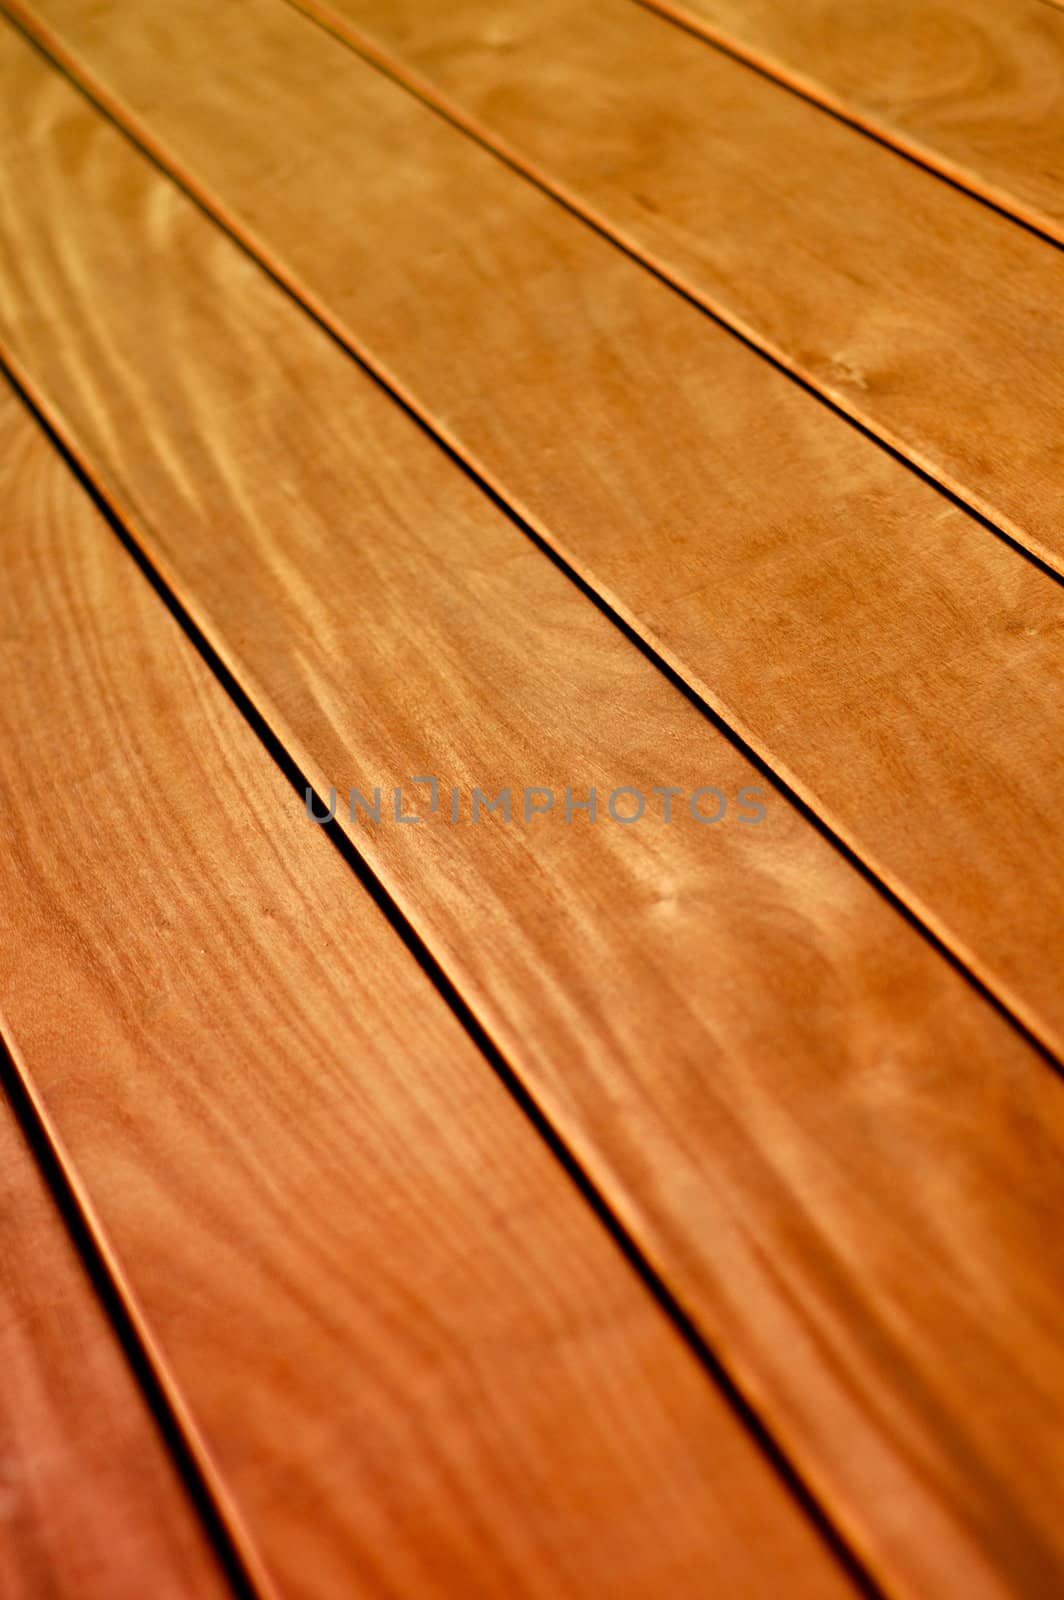 Abstract Background Texture of Wooden Floor Boards With Shallow Depth of Focus